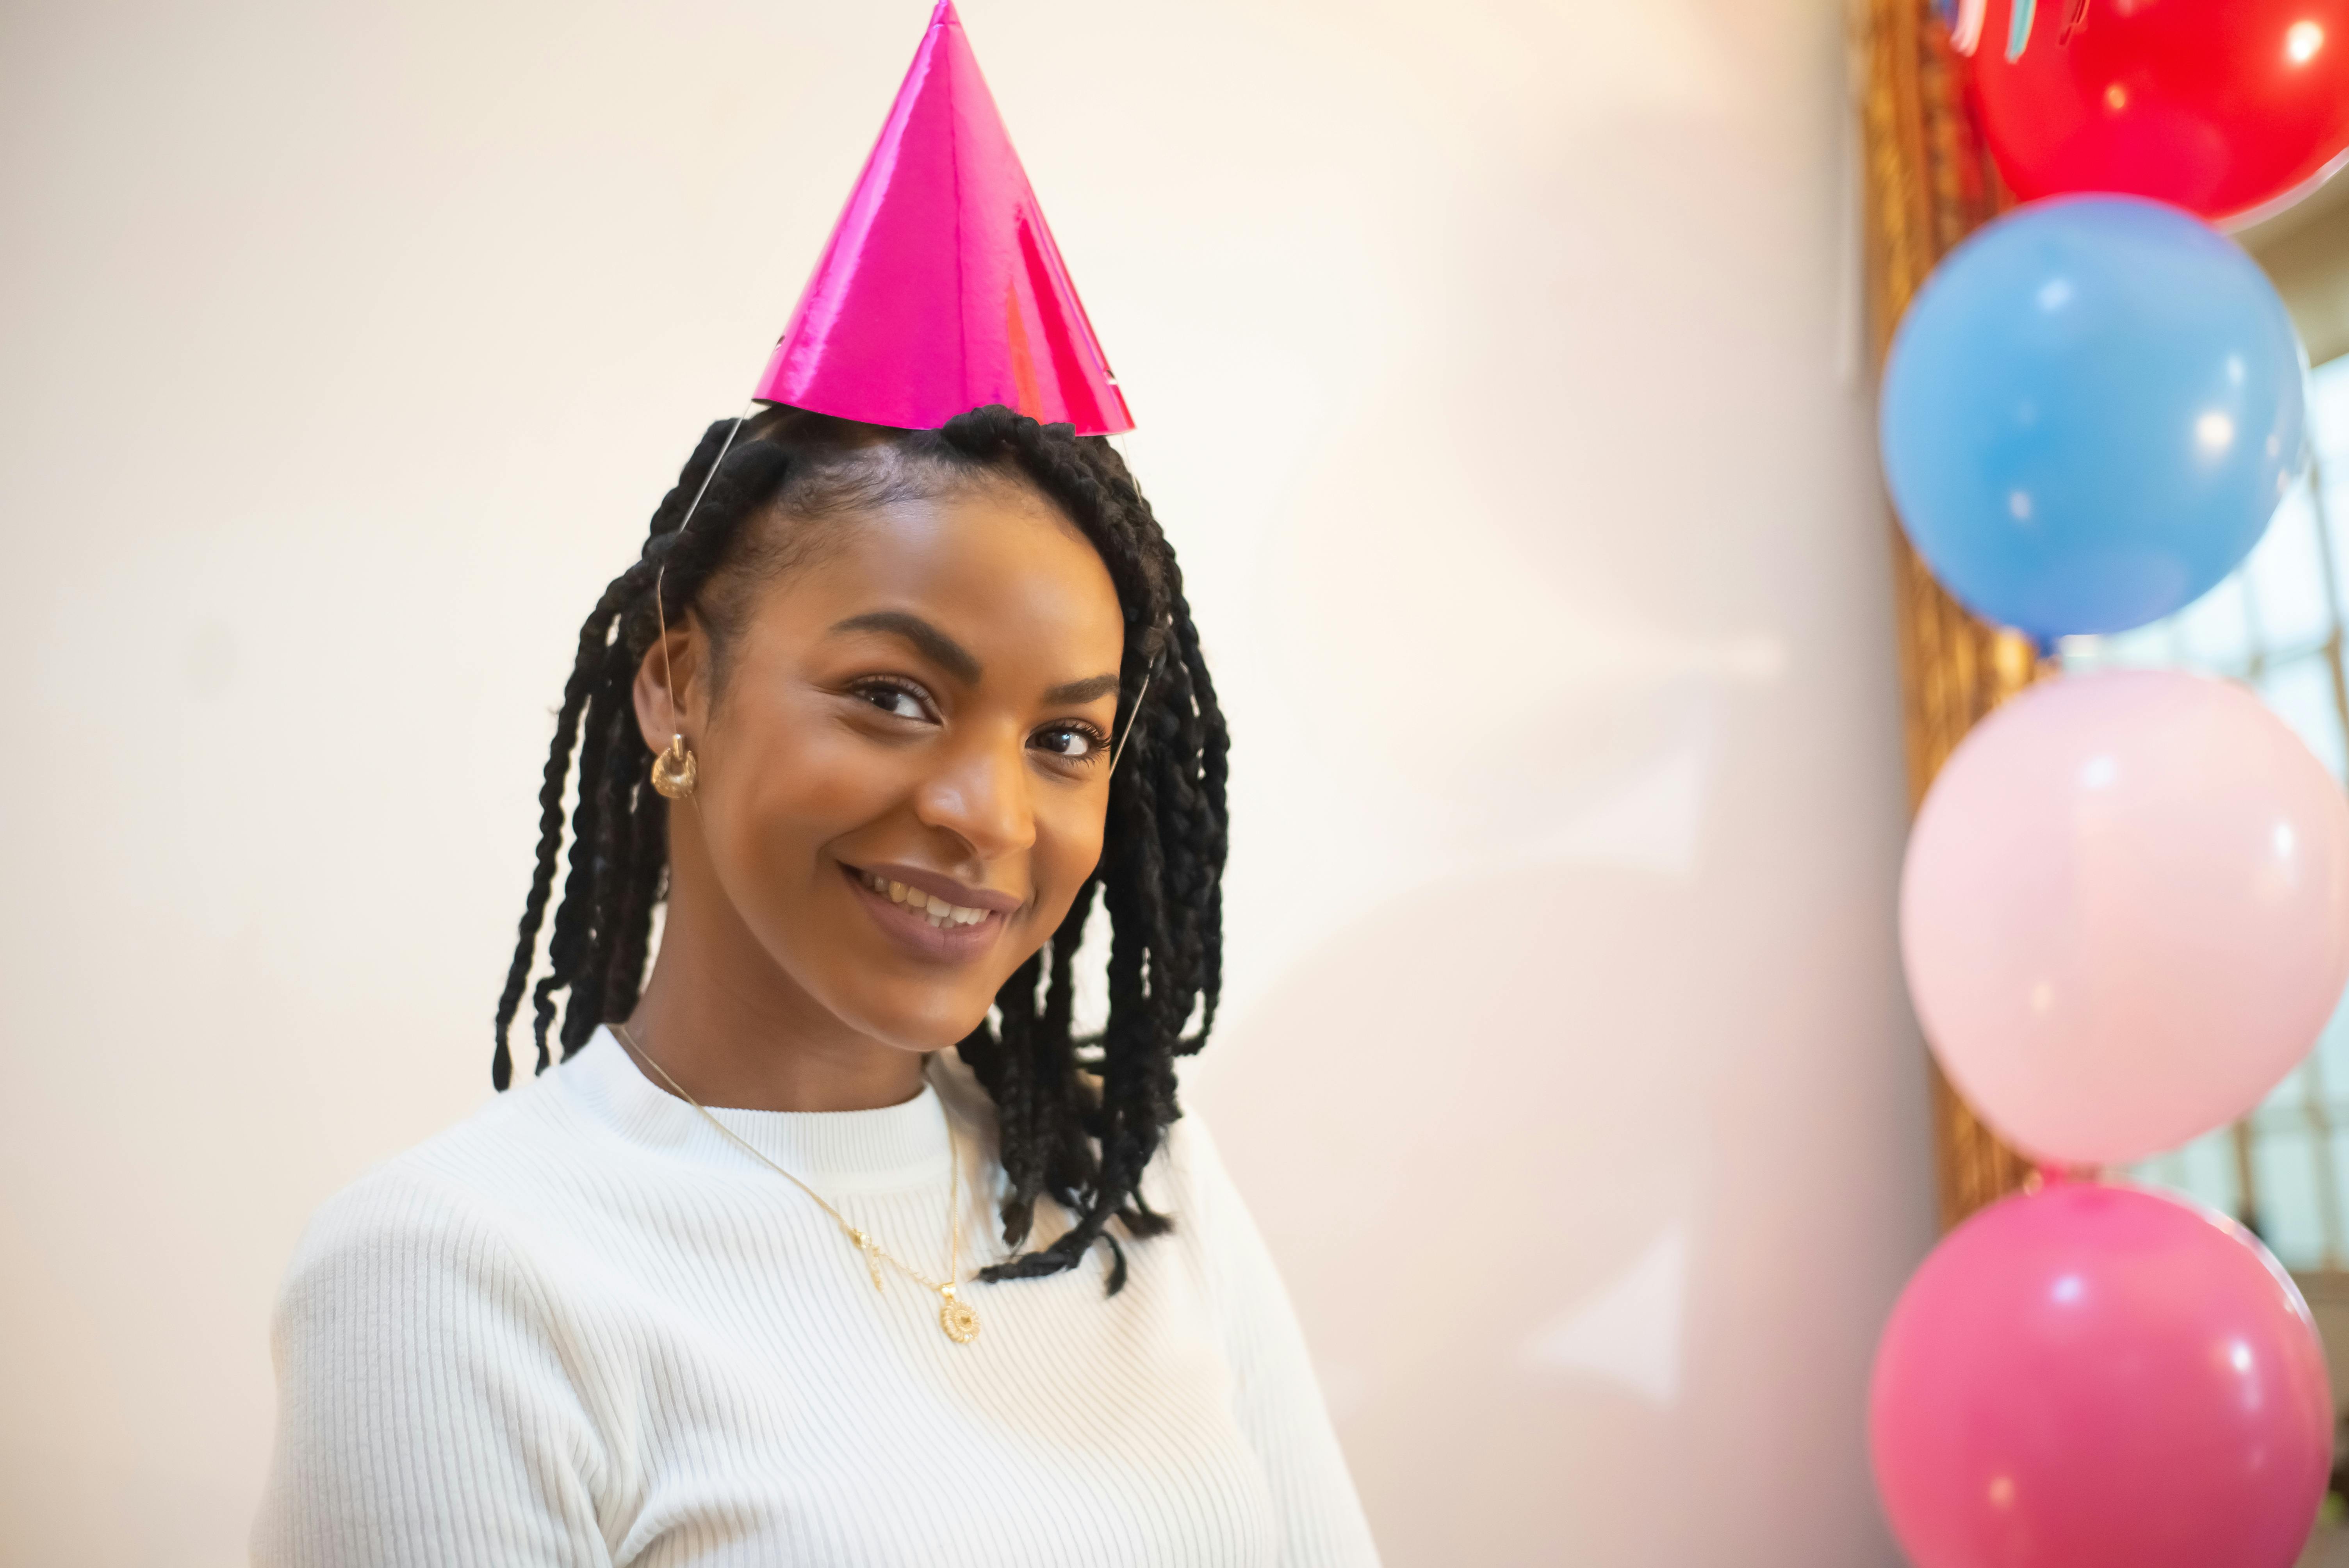 A happy woman wearing a party hat | Source: Pexels